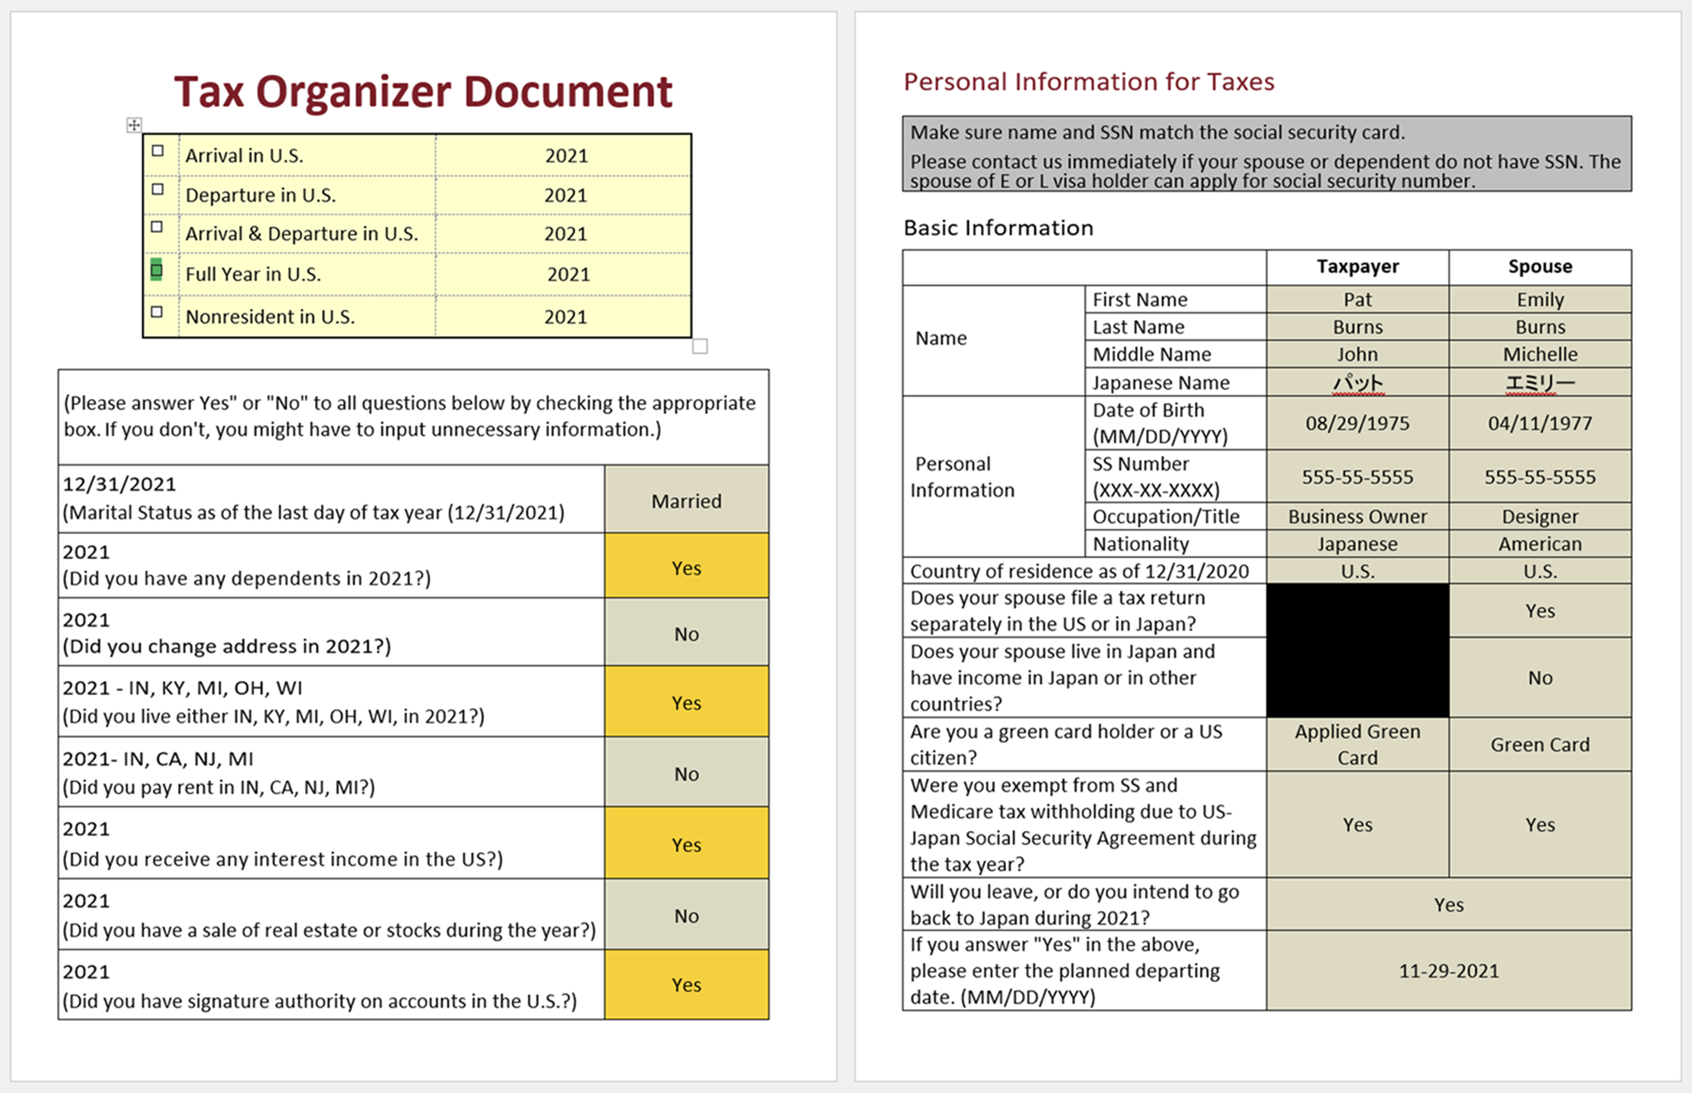 Forms2Docs uses document logic to efficiently accomplish robust document configuration.